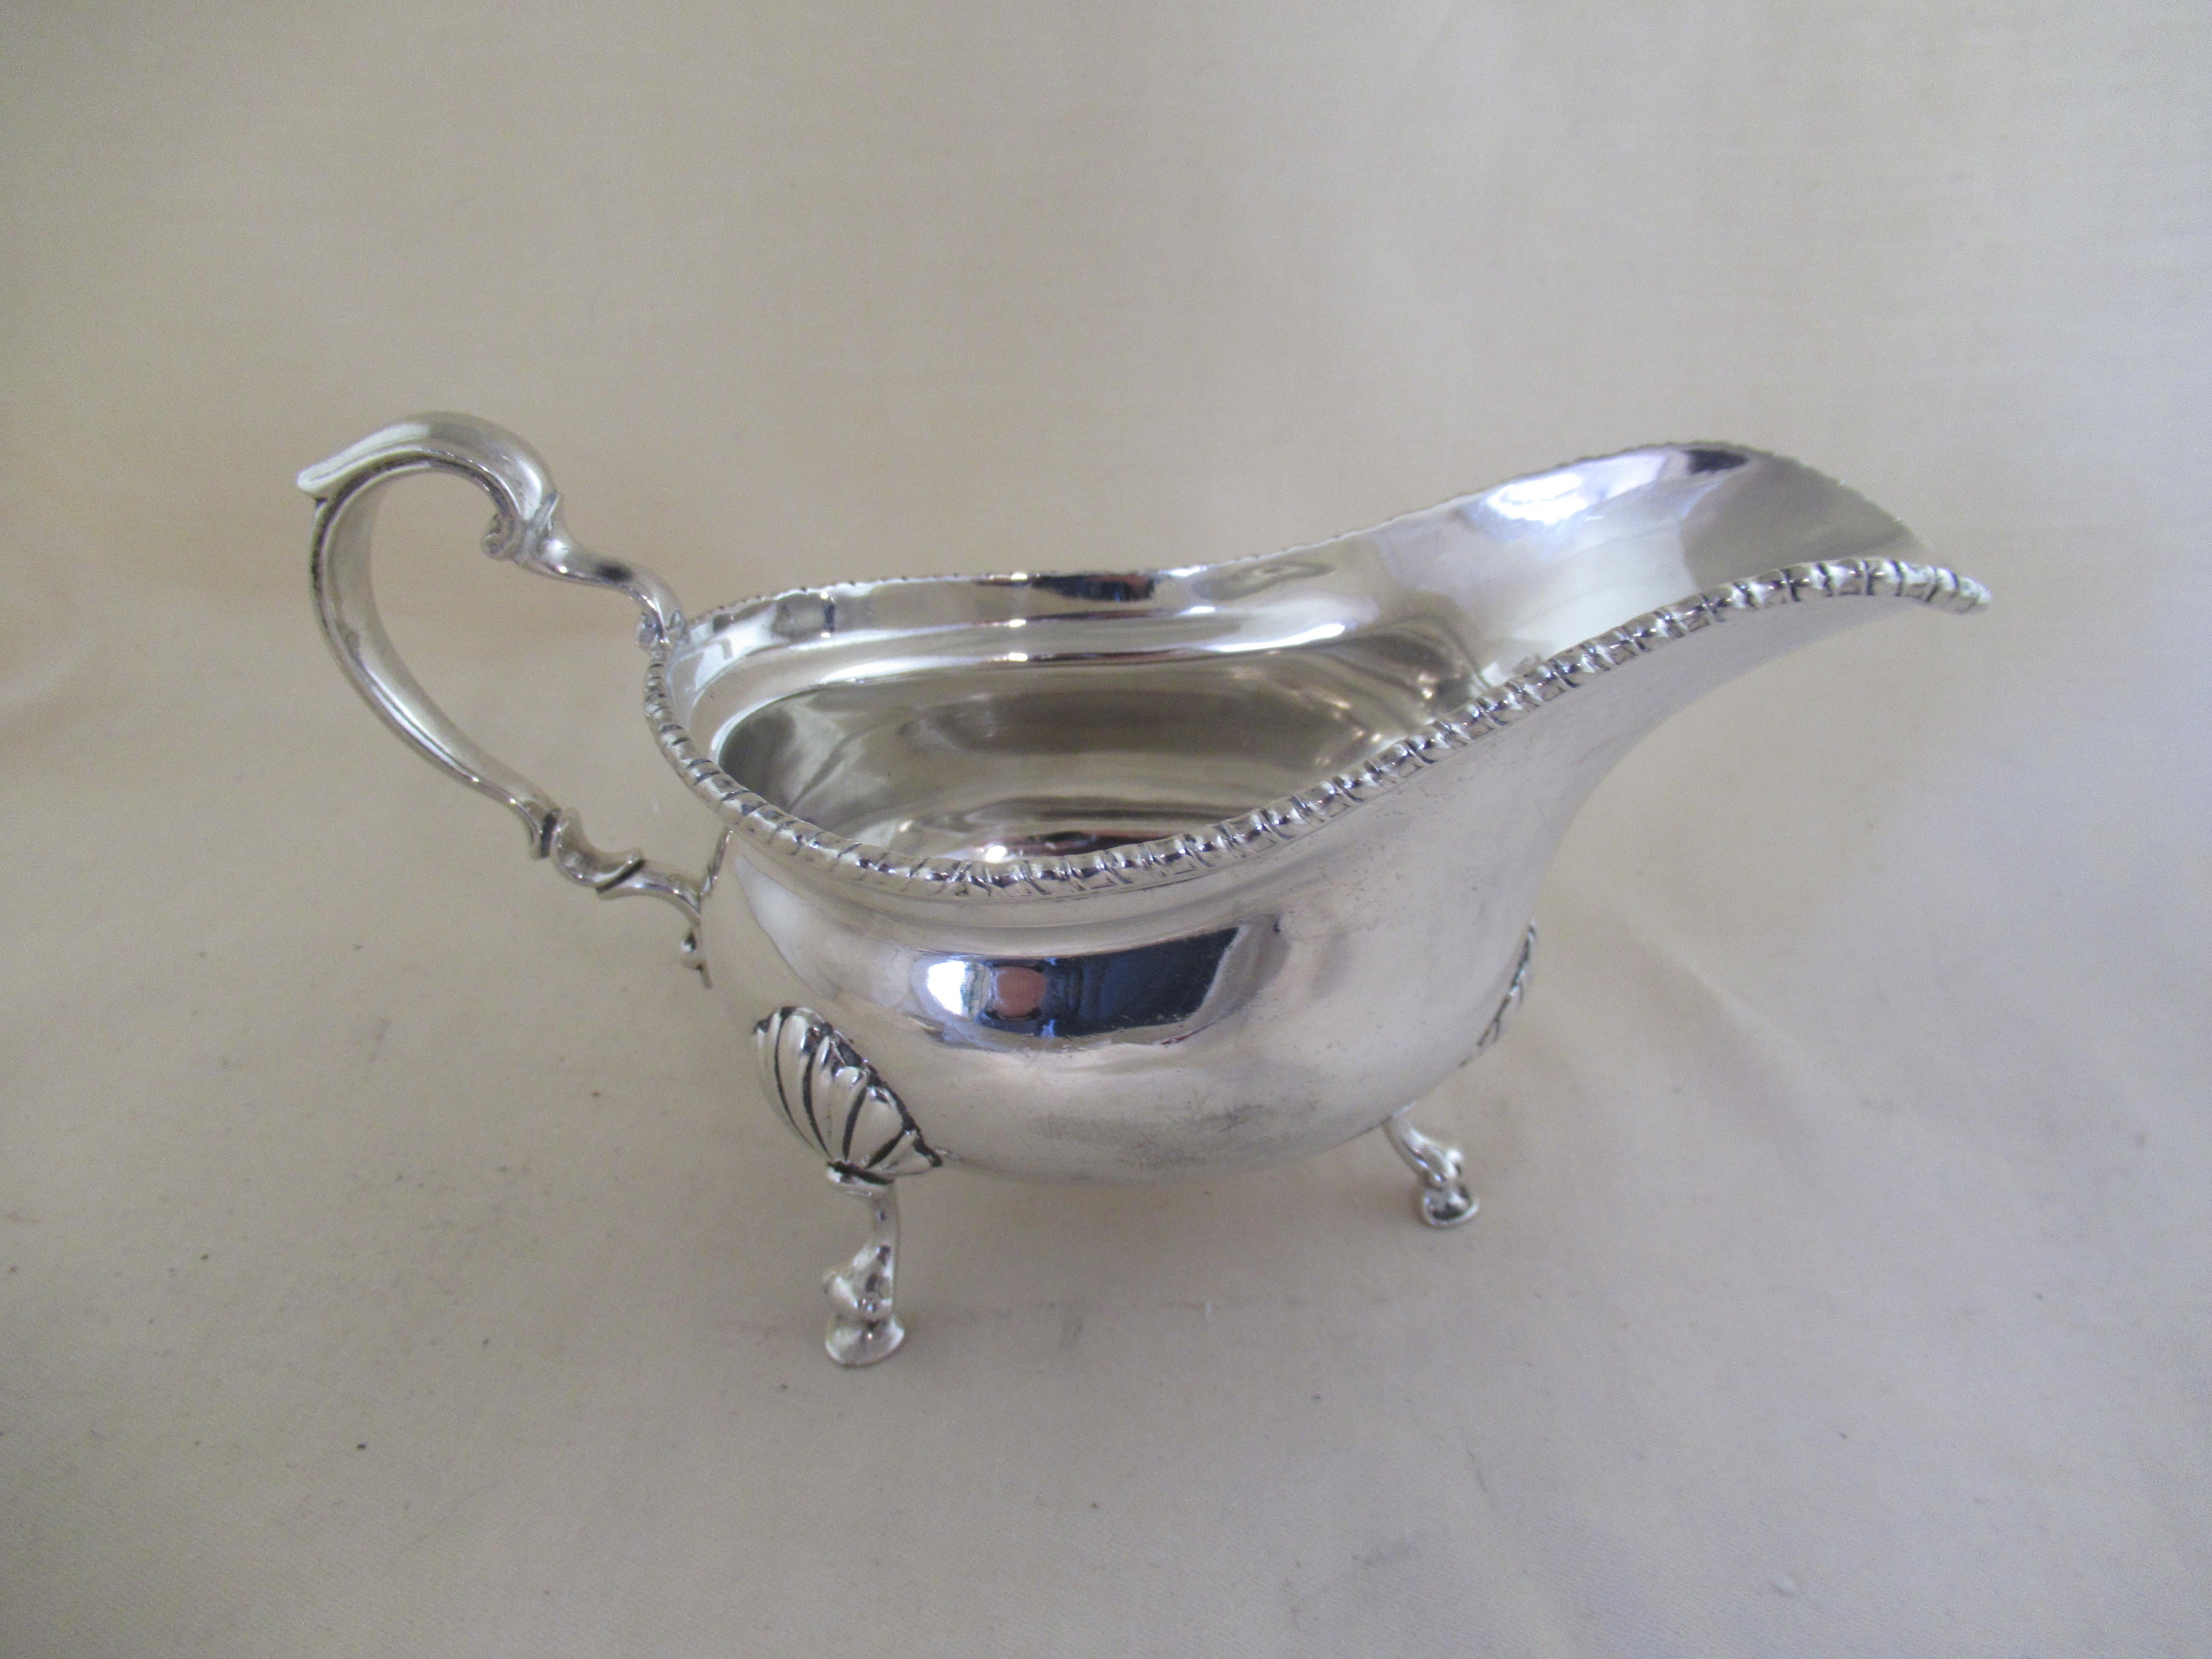 English Solid Sterling Silver SAUCE BOAT / CREAM JUG
Full set of English hallmarks applied by the London Assay Office, showing that it was made in London 1928.
 Lion - Sterling guarantee
 Leopard`s Head - London Assay Office
 n - Date letter for